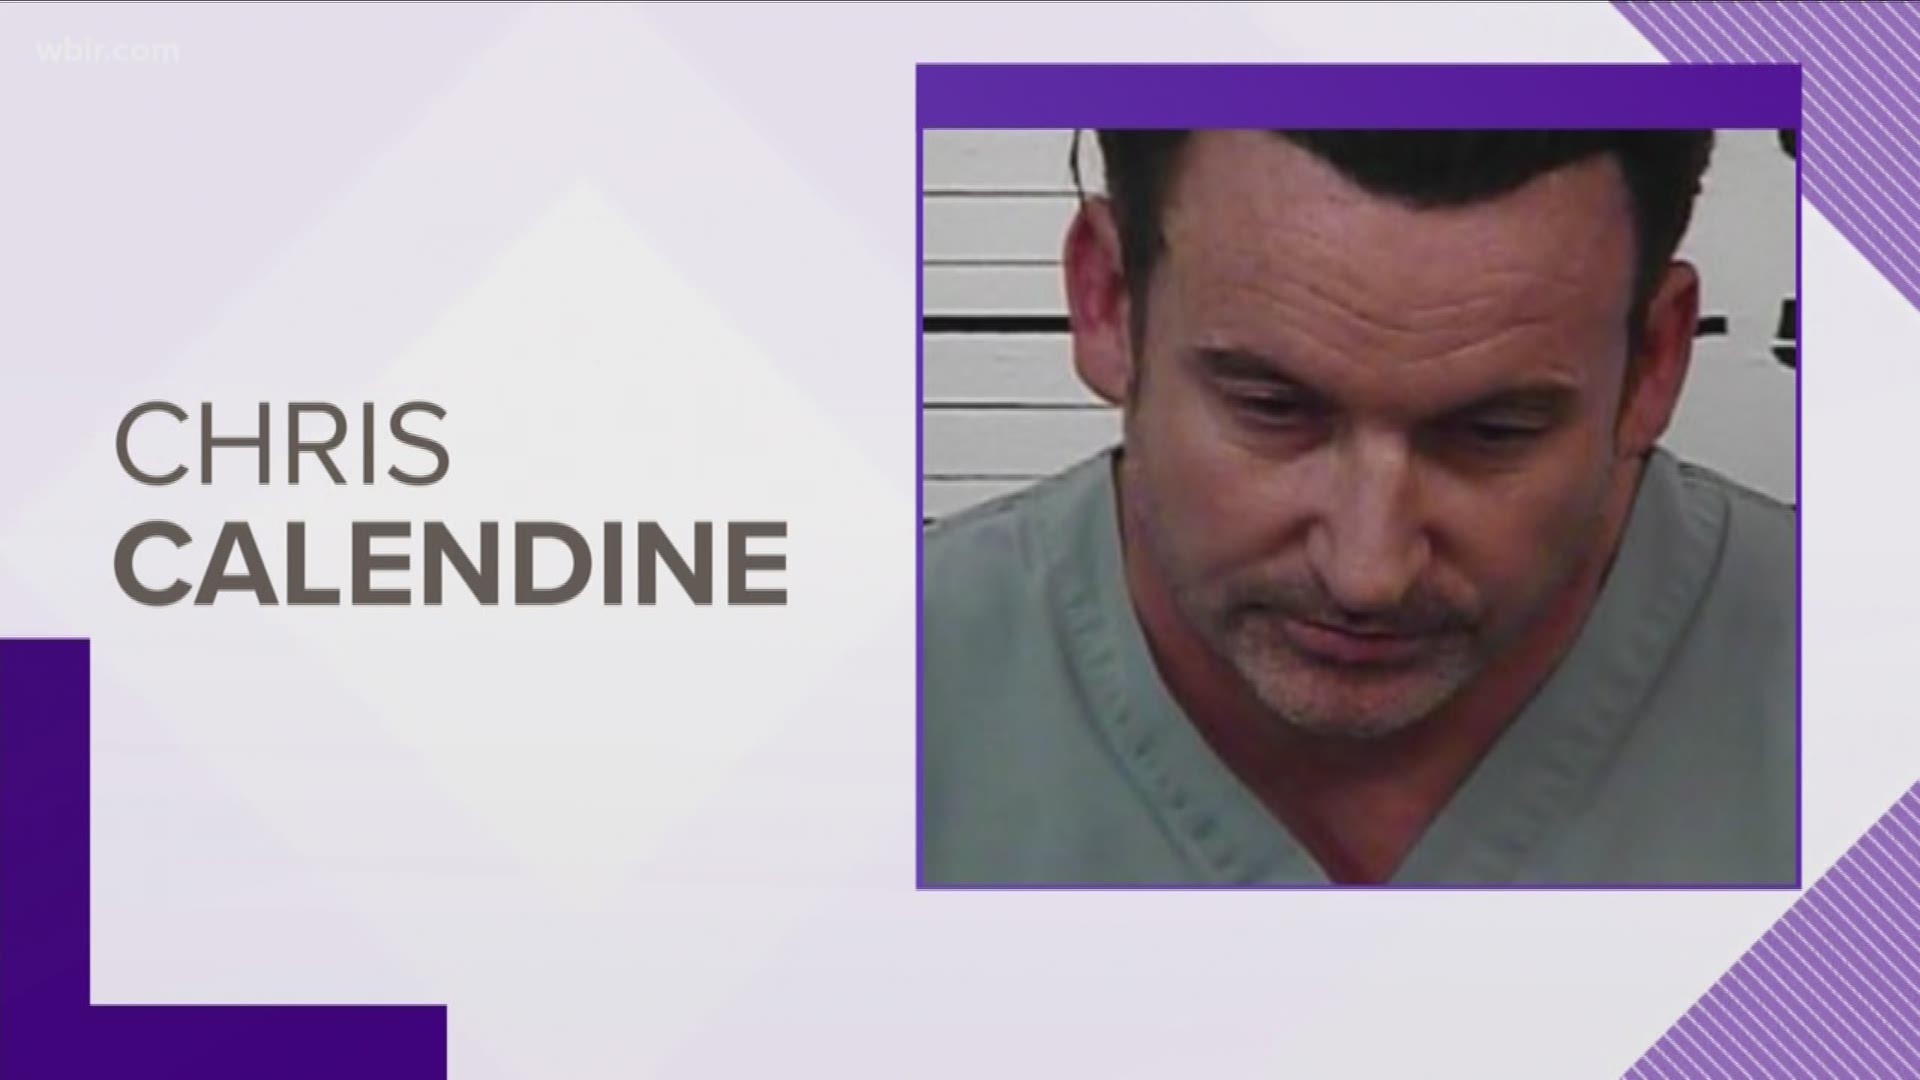 The Hawkins County Sheriff's Office arrested him in August 2017. District Attorney Dan Armstrong said someone made the complaint against Calendine with the HCSO in July 2017.